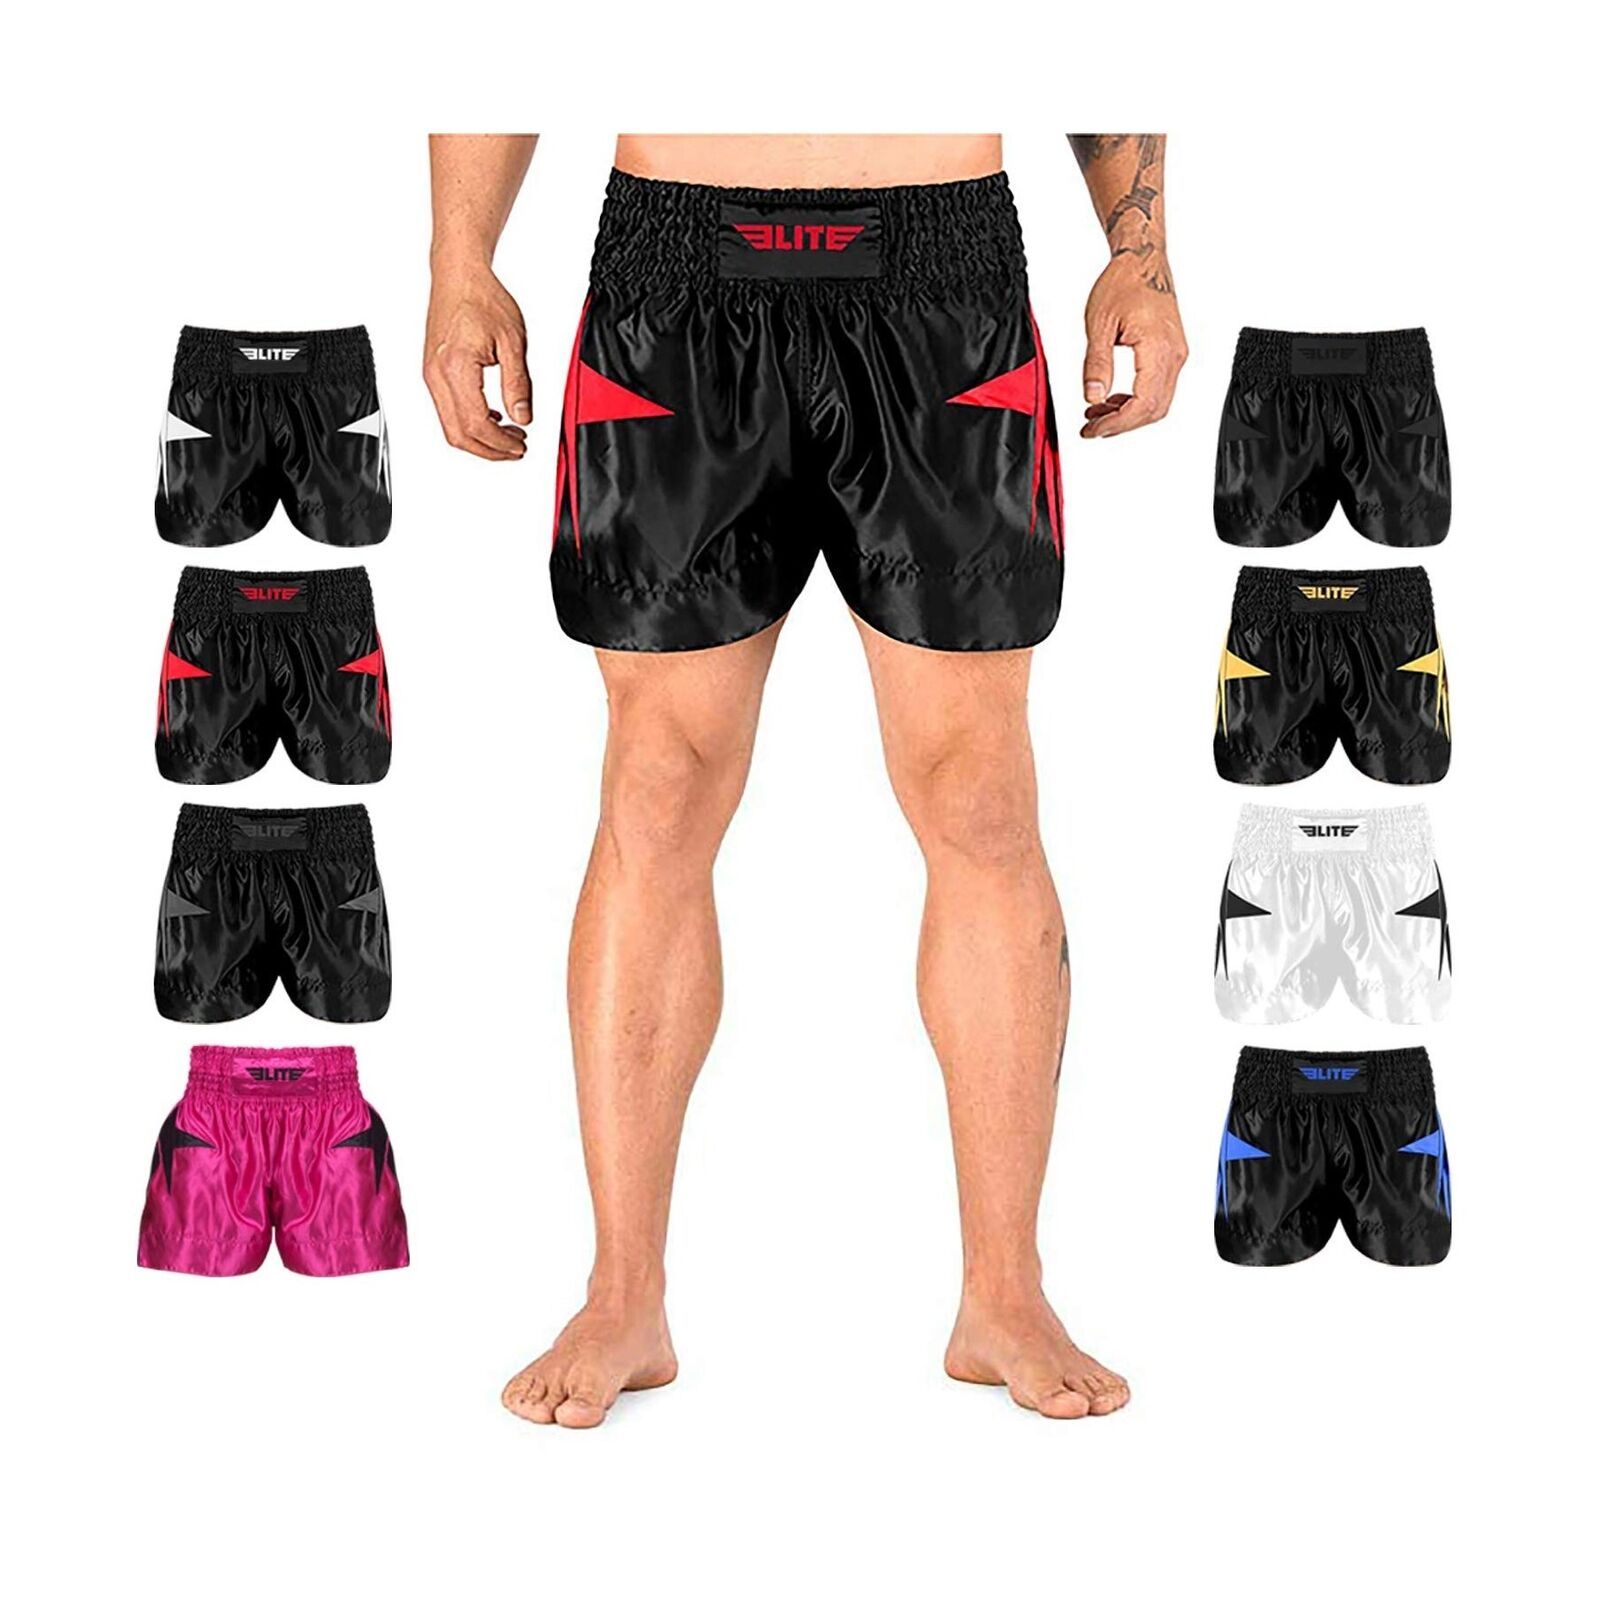 Best mma shorts for quick kick. Premium Elite MMA shorts for serious fighters. Exceptionally comfortable and durable, these shorts are designed with the greatest materials. Suitable for MMA, grappling, and fight training, these fight shorts are among the top choices for the best MMA shorts.